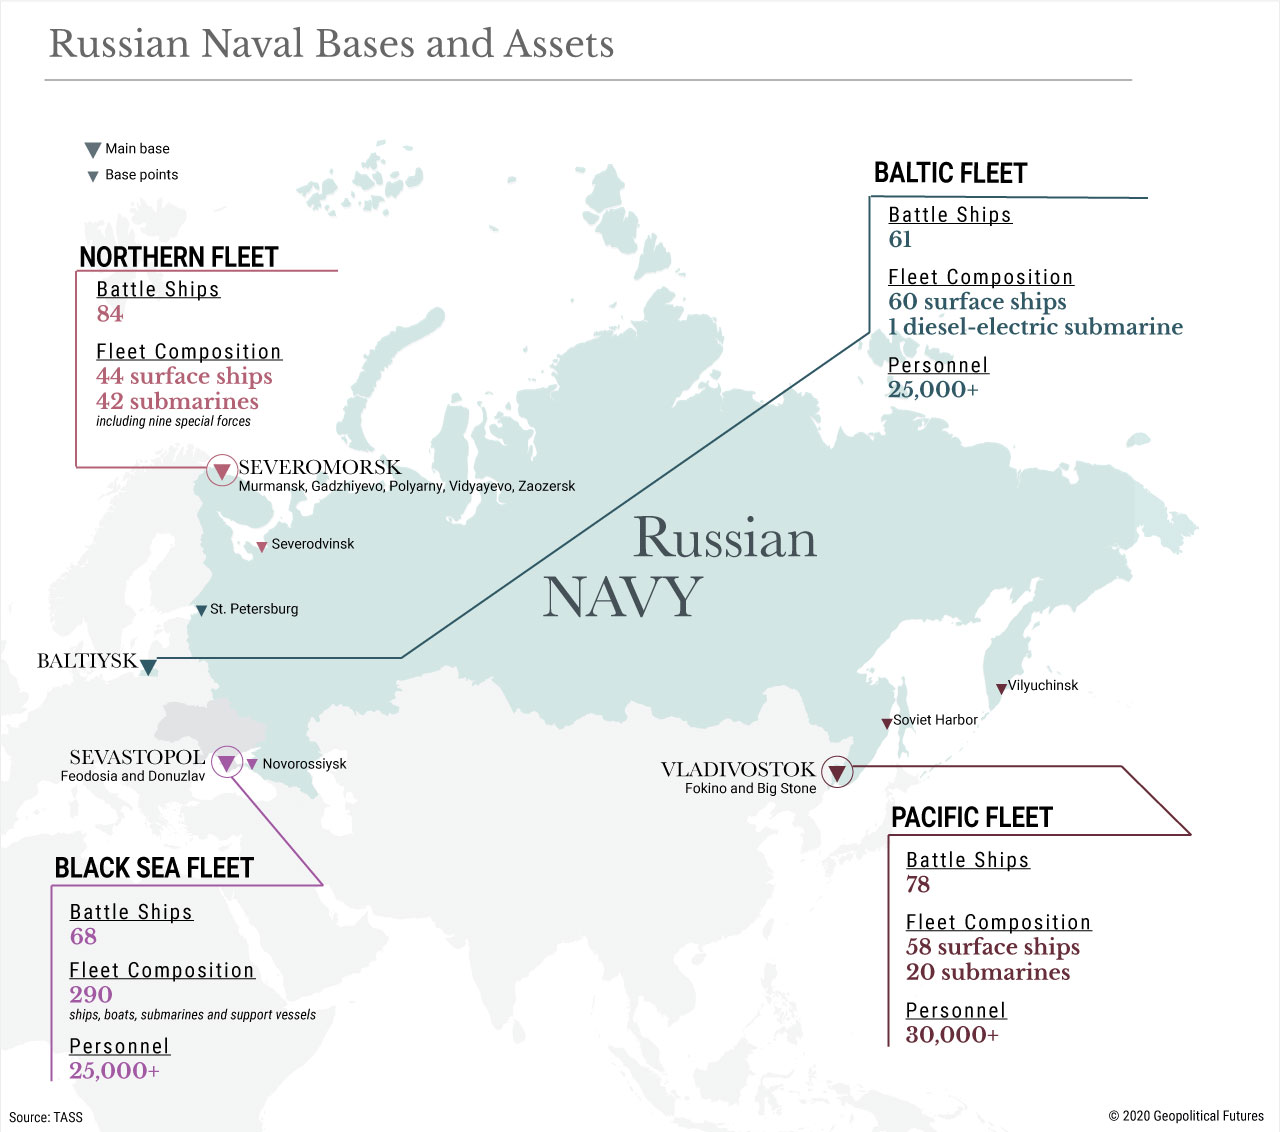 Russian Naval Bases and Assets